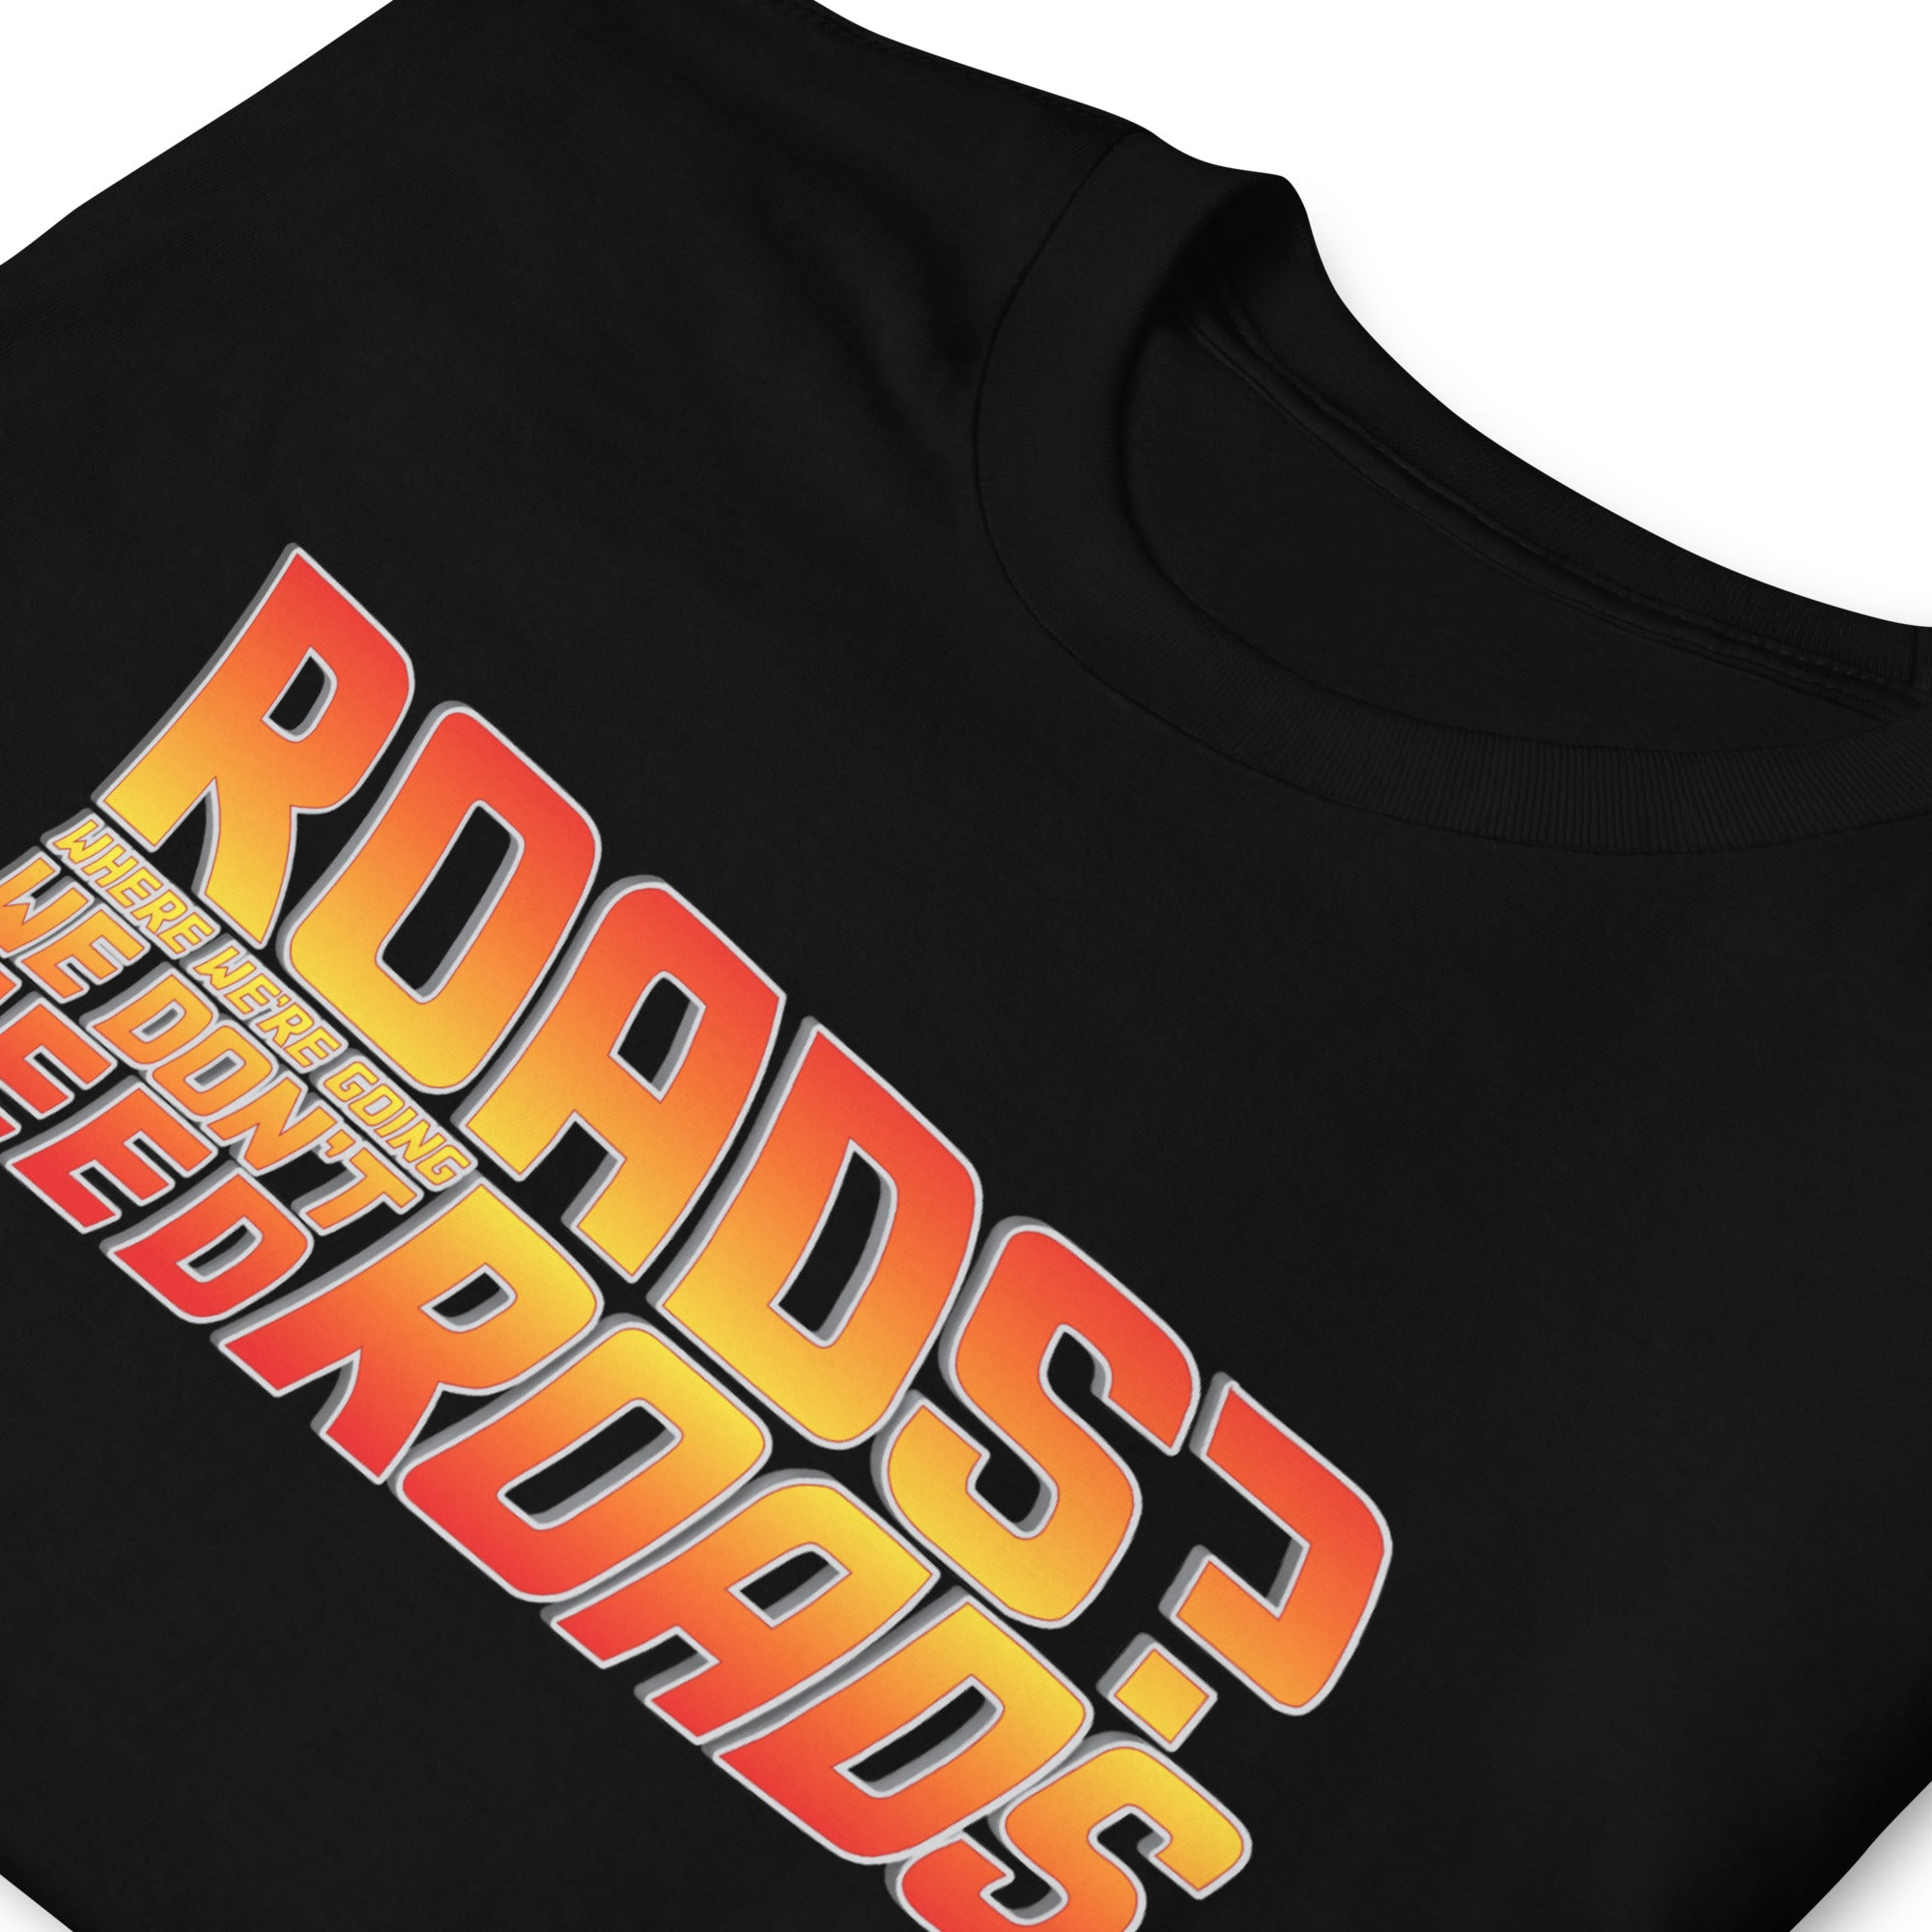 Roads? Where We're Going We Don't Need Roads T-Shirt